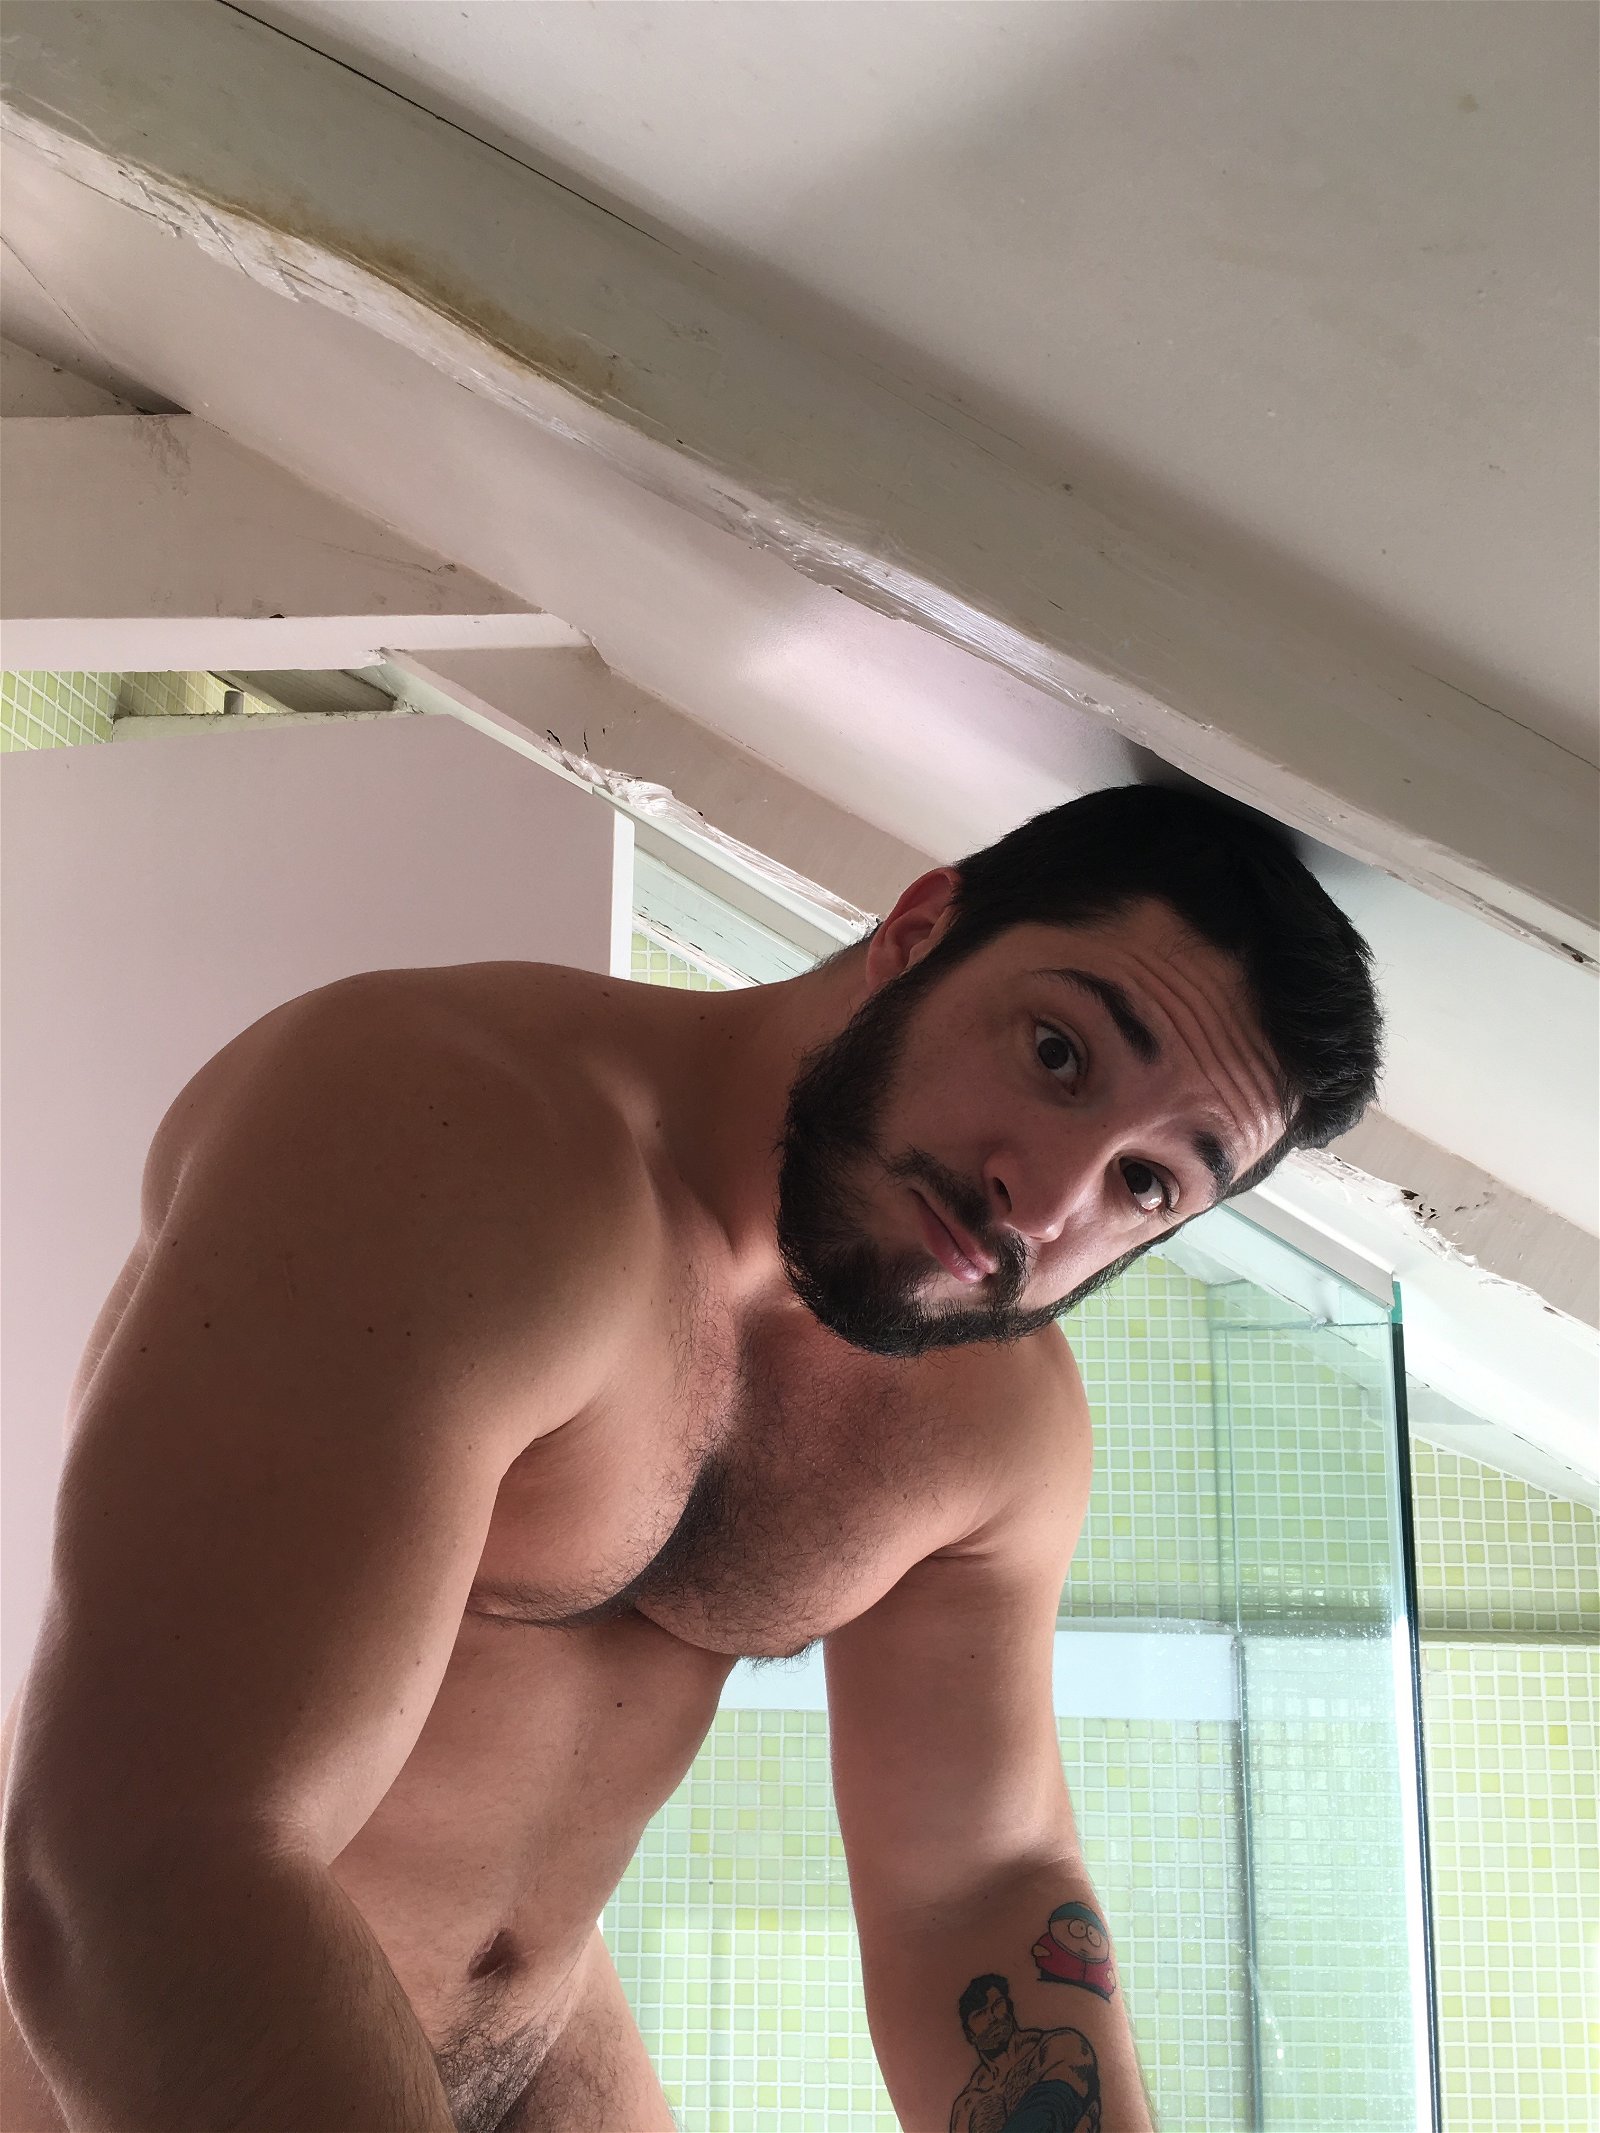 Watch the Photo by R__gay with the username @Rgay, posted on May 19, 2019. The post is about the topic GayExTumblr. and the text says '#manlove #gay #muscle'